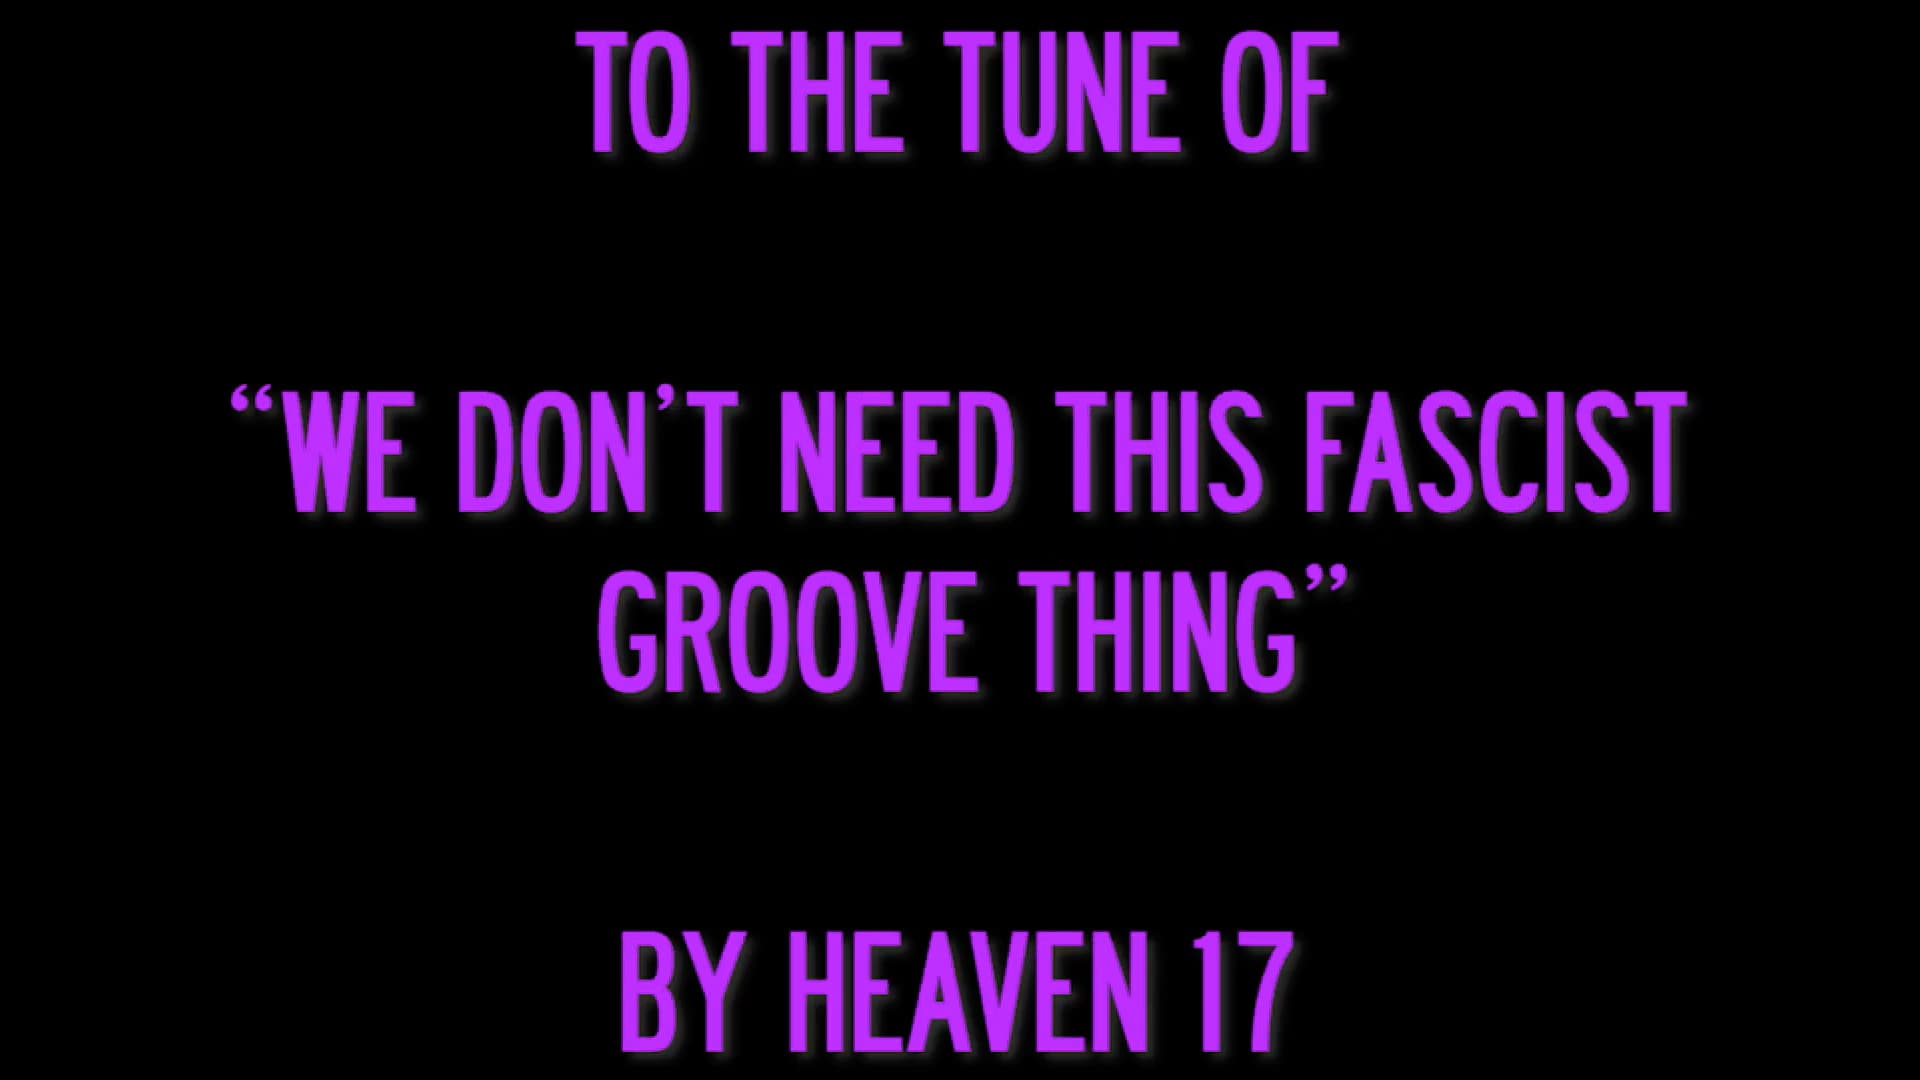 Heaven 12 - "We Don't Need This Fascist Groove Thing"